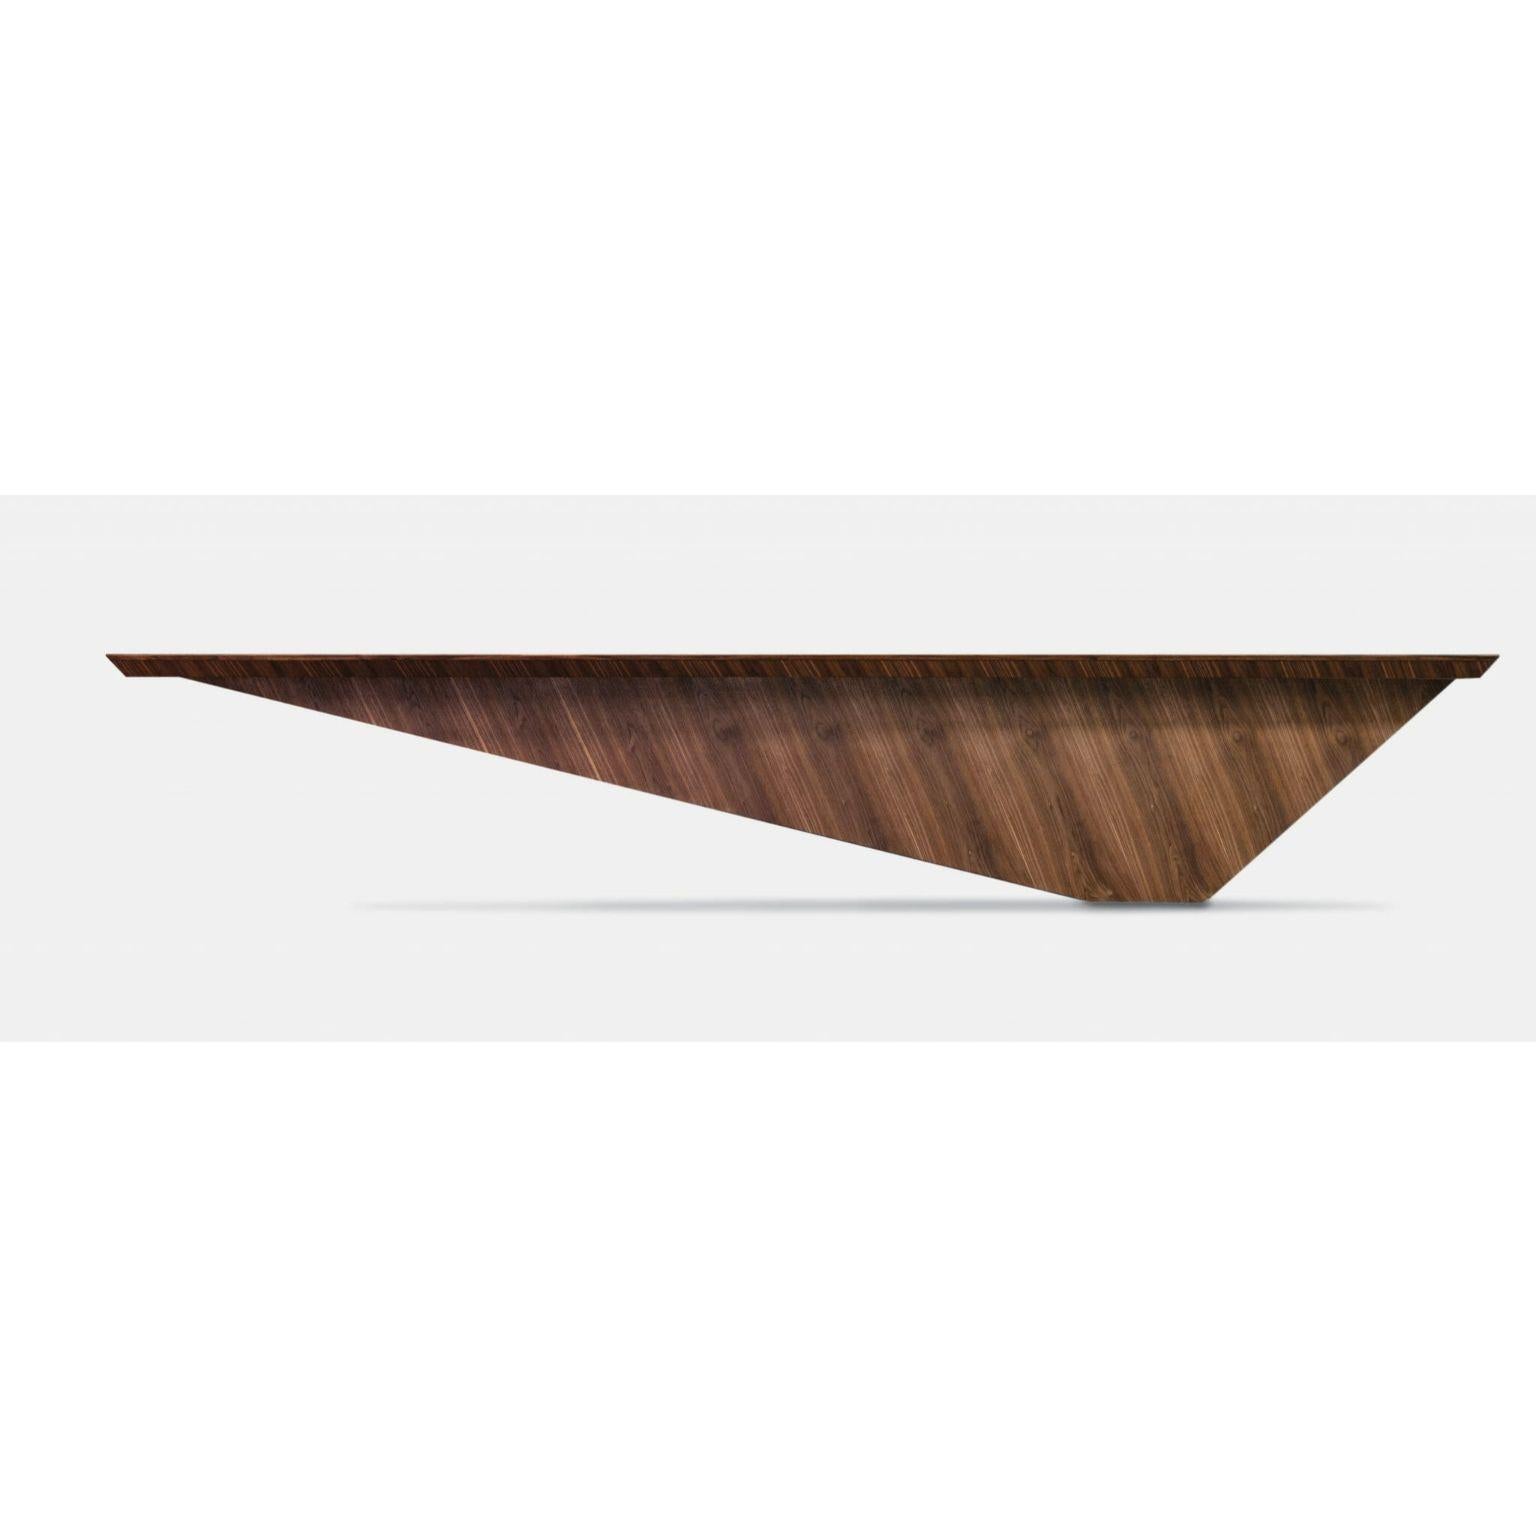 Diamond dining table by Vasco Vieira
Dimensions: W 300 x D 100 x H 75 cm
Materials: American walnut 100% solid wood

Dimensions available: W 400 cm
Available in ashwood

The Diamond table is a large suspension table created by the Portuguese